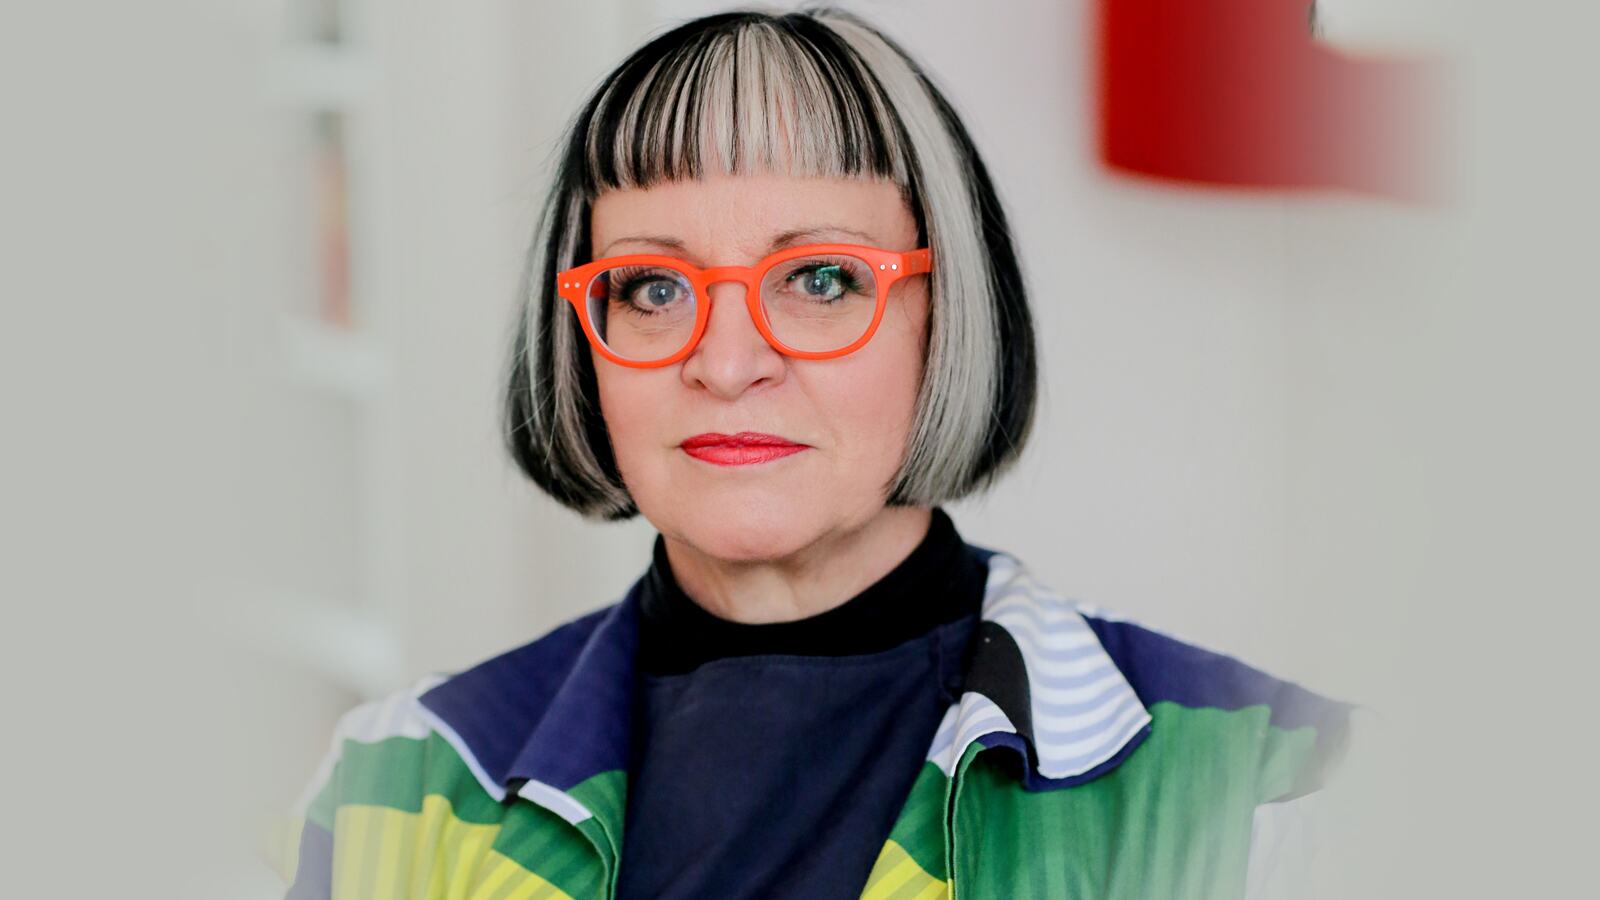 How to Avoid Spreading Panic in This Pandemic: Philippa Perry's Advice